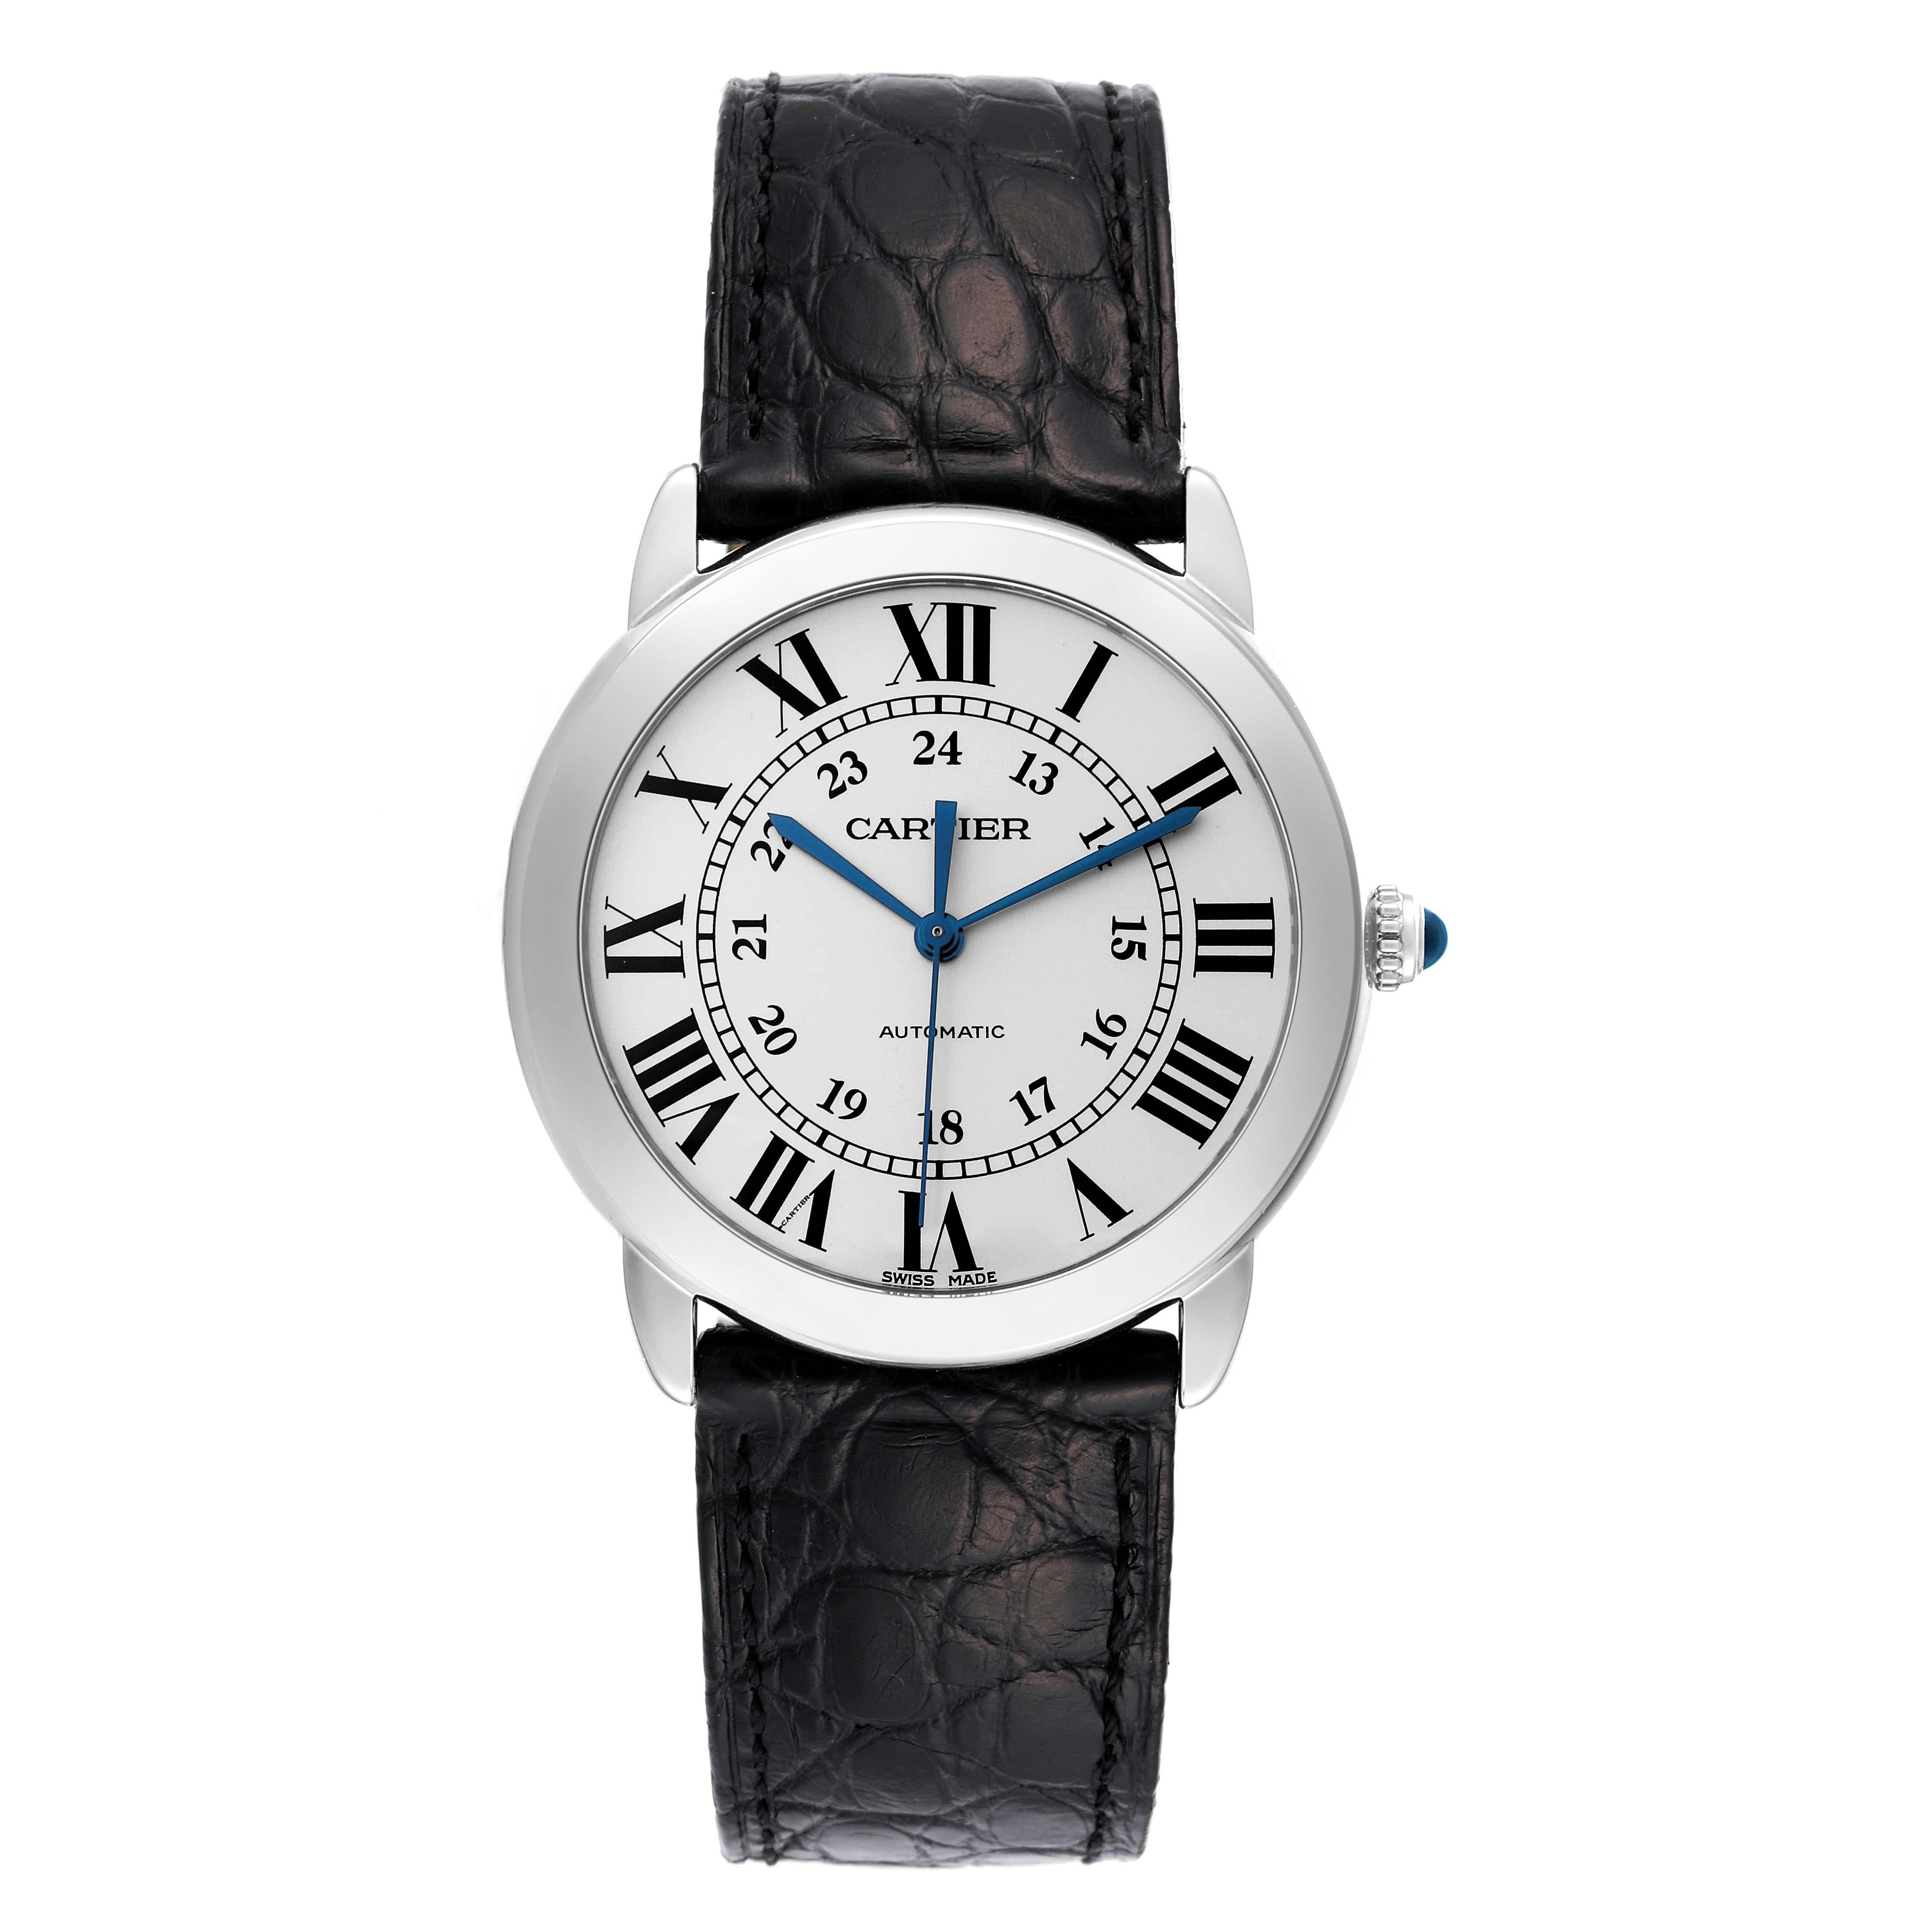 Cartier Ronde Solo Silver Dial Black Strap Automatic Watch WSRN0021. Automatic self-winding movement. Stainless steel case 36.0 mm in diameter. Circular grained crown set with the blue spinel cabochon. . Scratch resistant sapphire crystal. Silvered